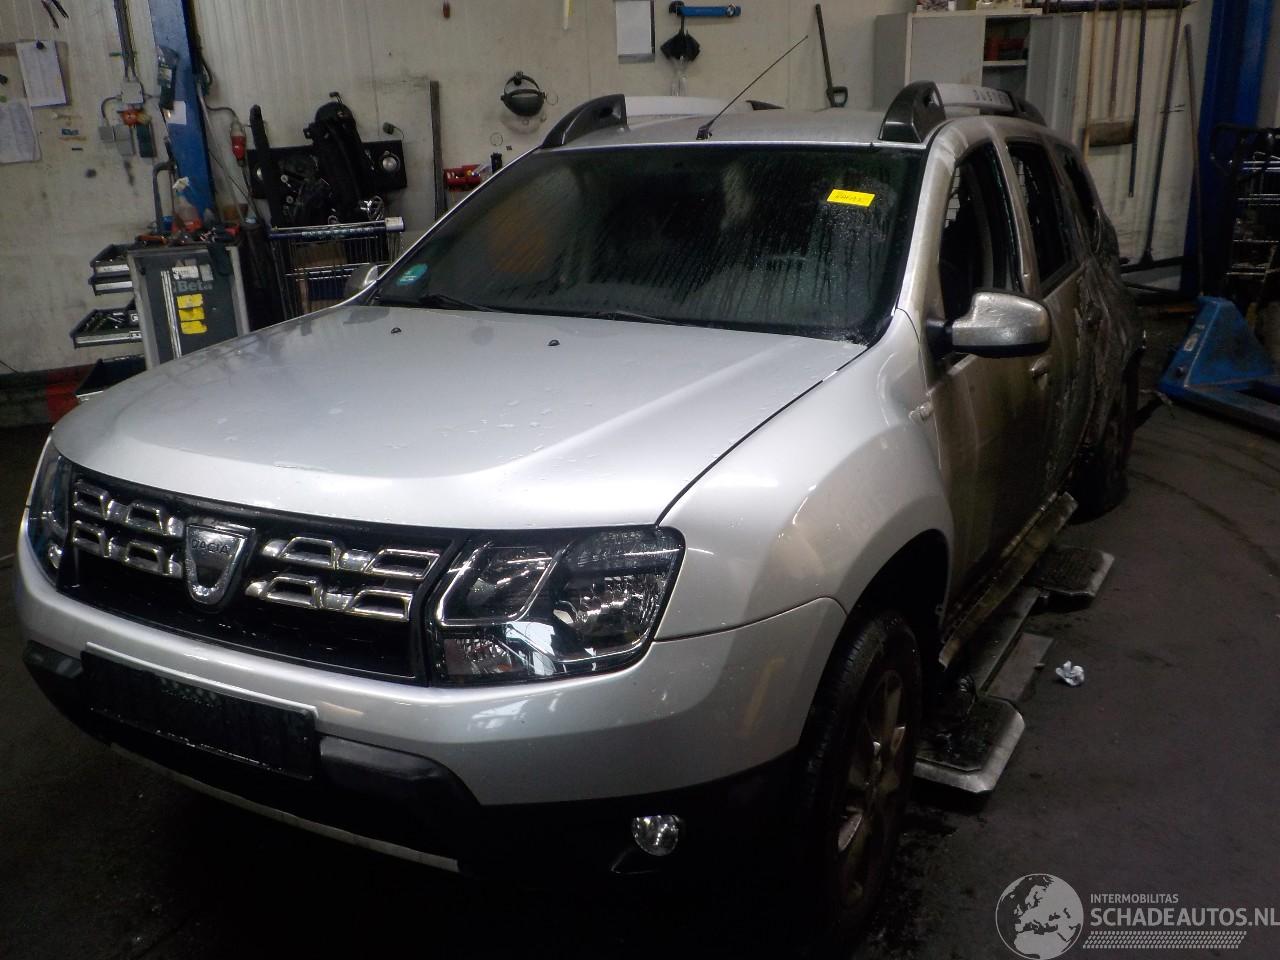 Dacia Duster Duster (HS) SUV 1.2 TCE 16V (H5F-408) [92kW]  (10-2013/01-2018)